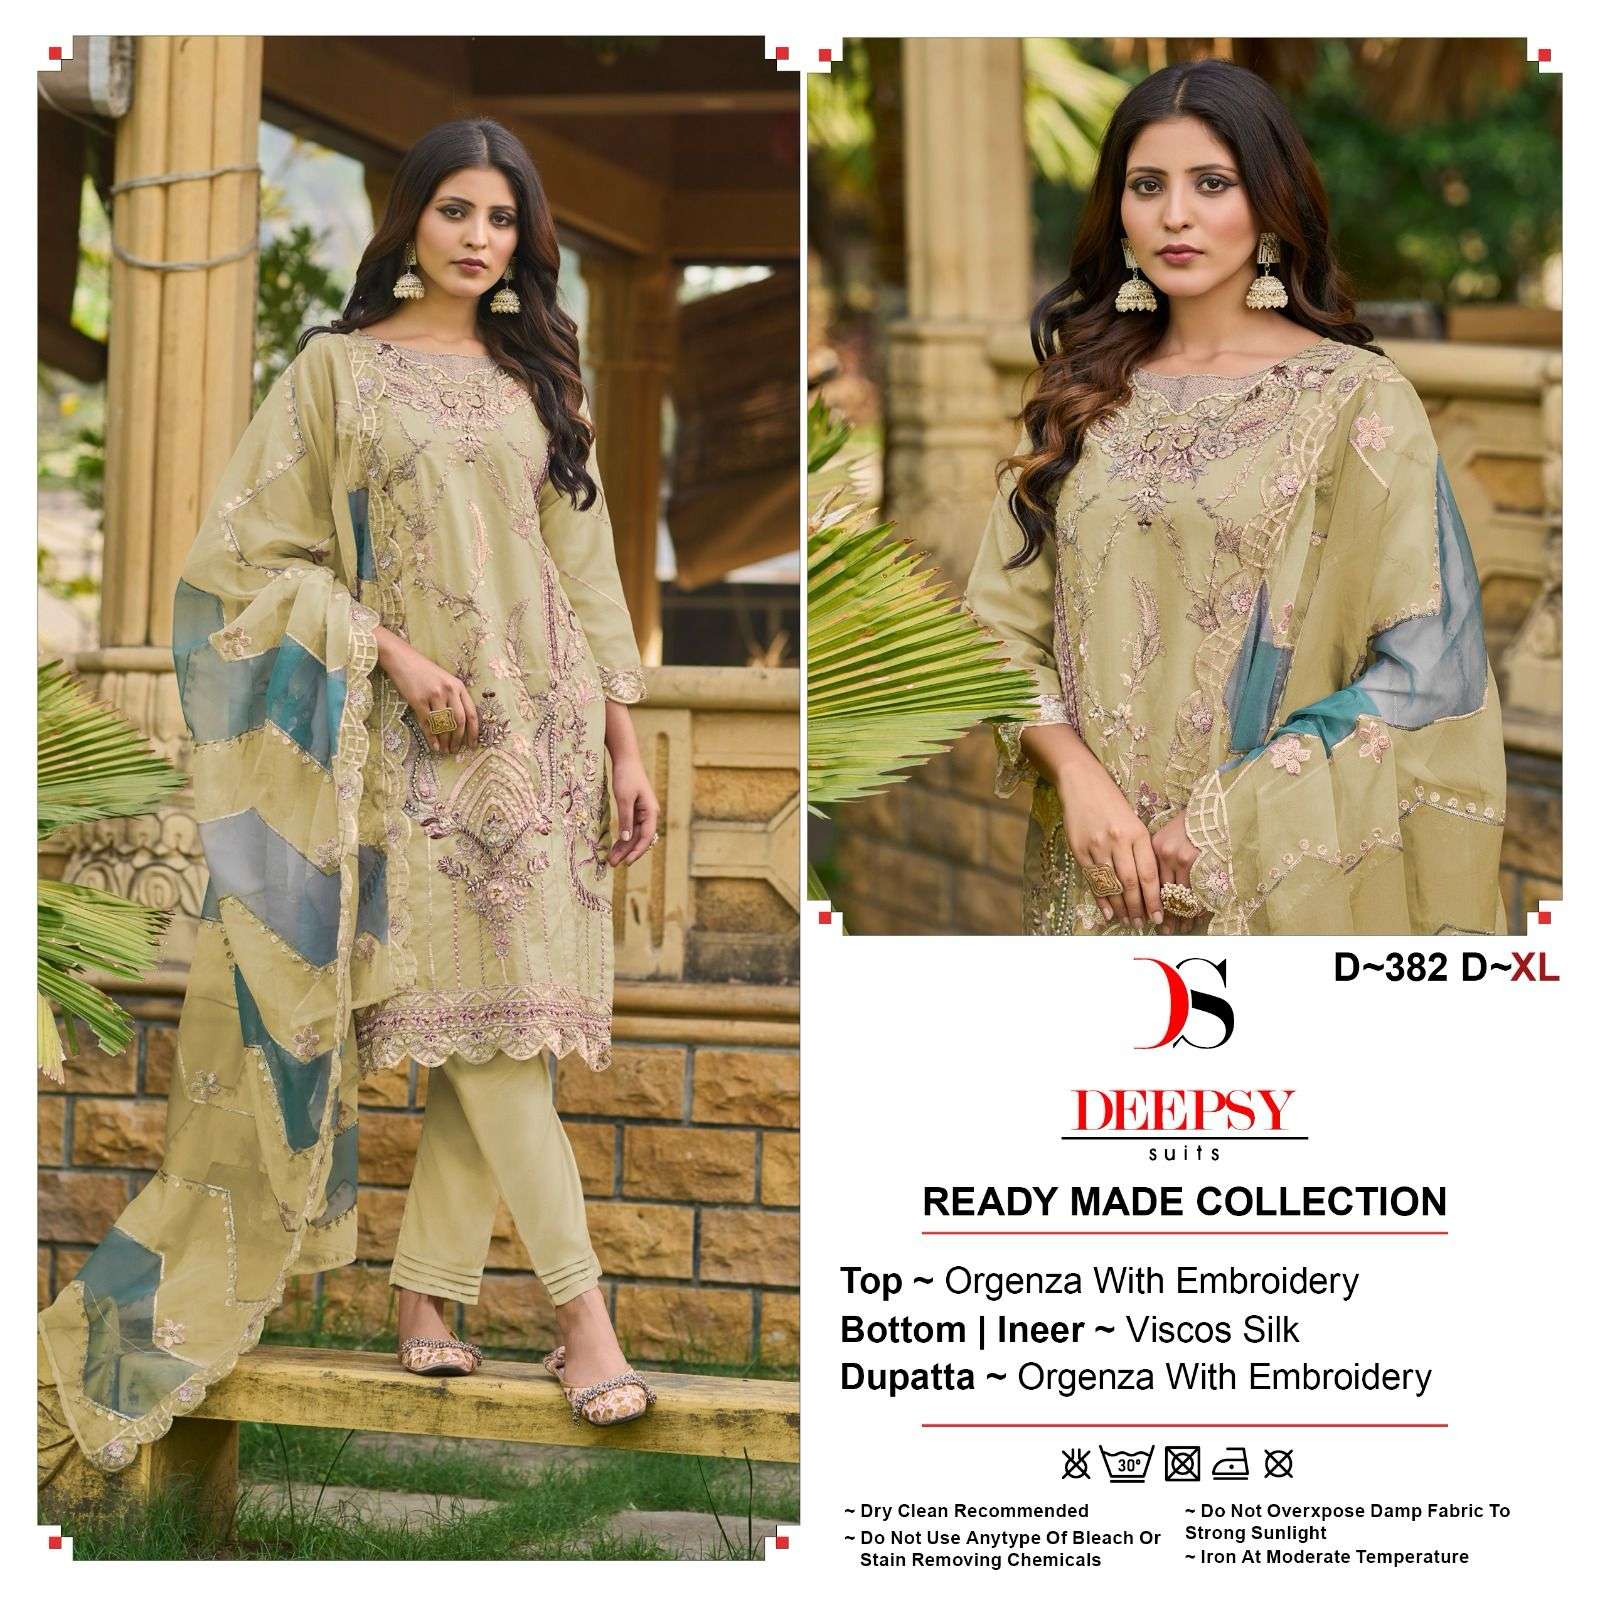 Deepsy suits chevron vol 10 cotton with embroidery work Cotton dupatta